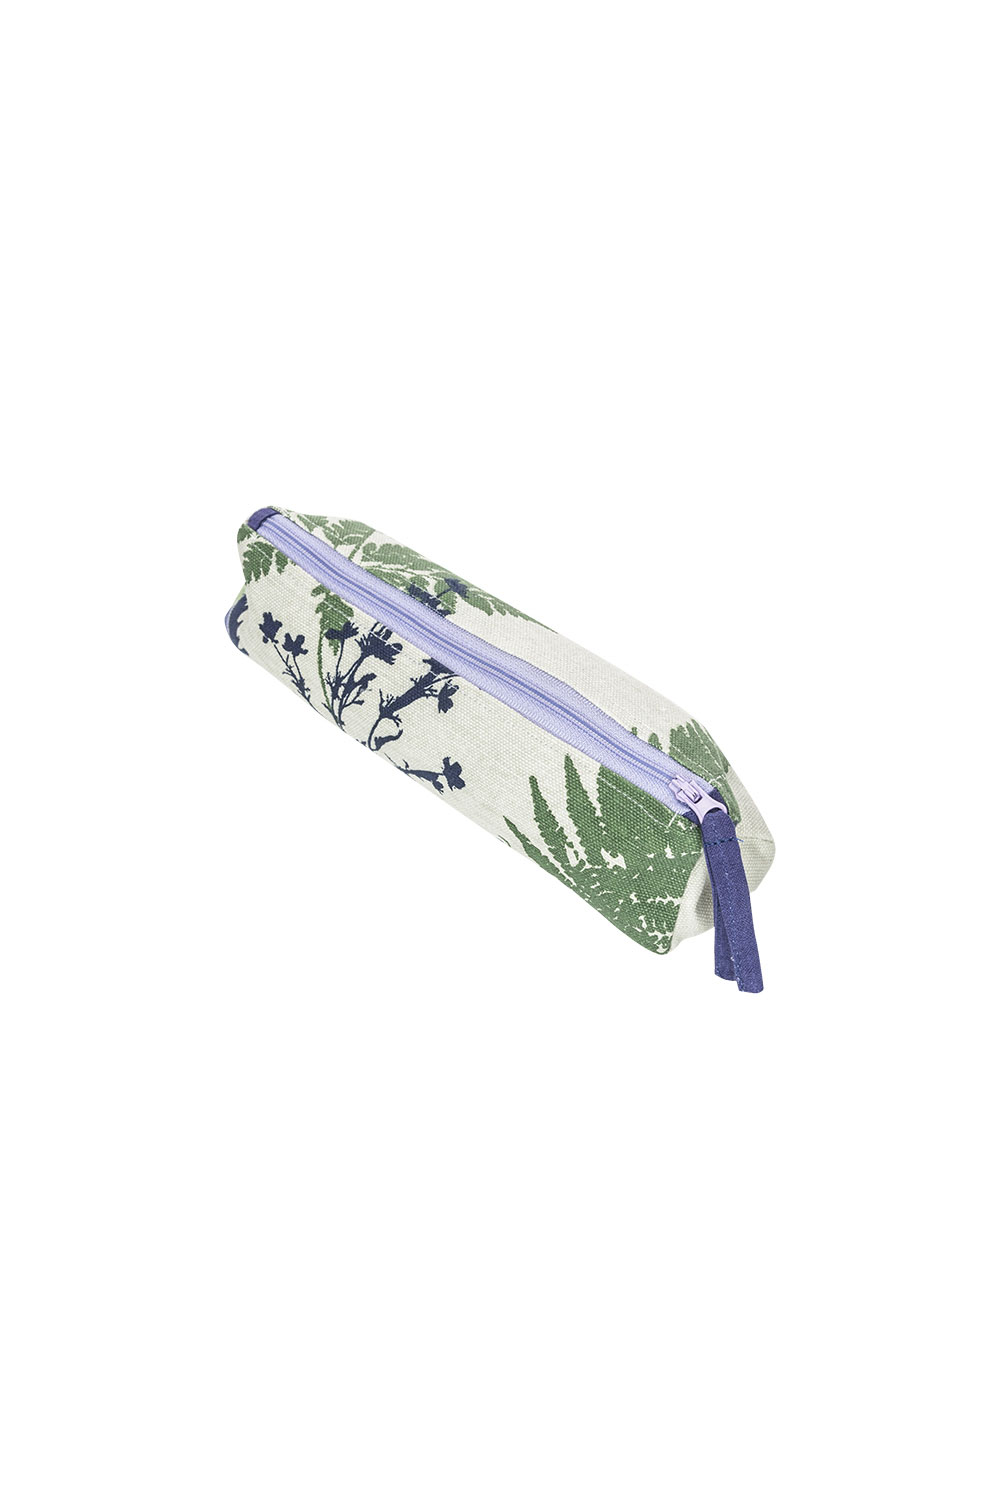 Tranquillo Pencil Case - Fern - Sustainable